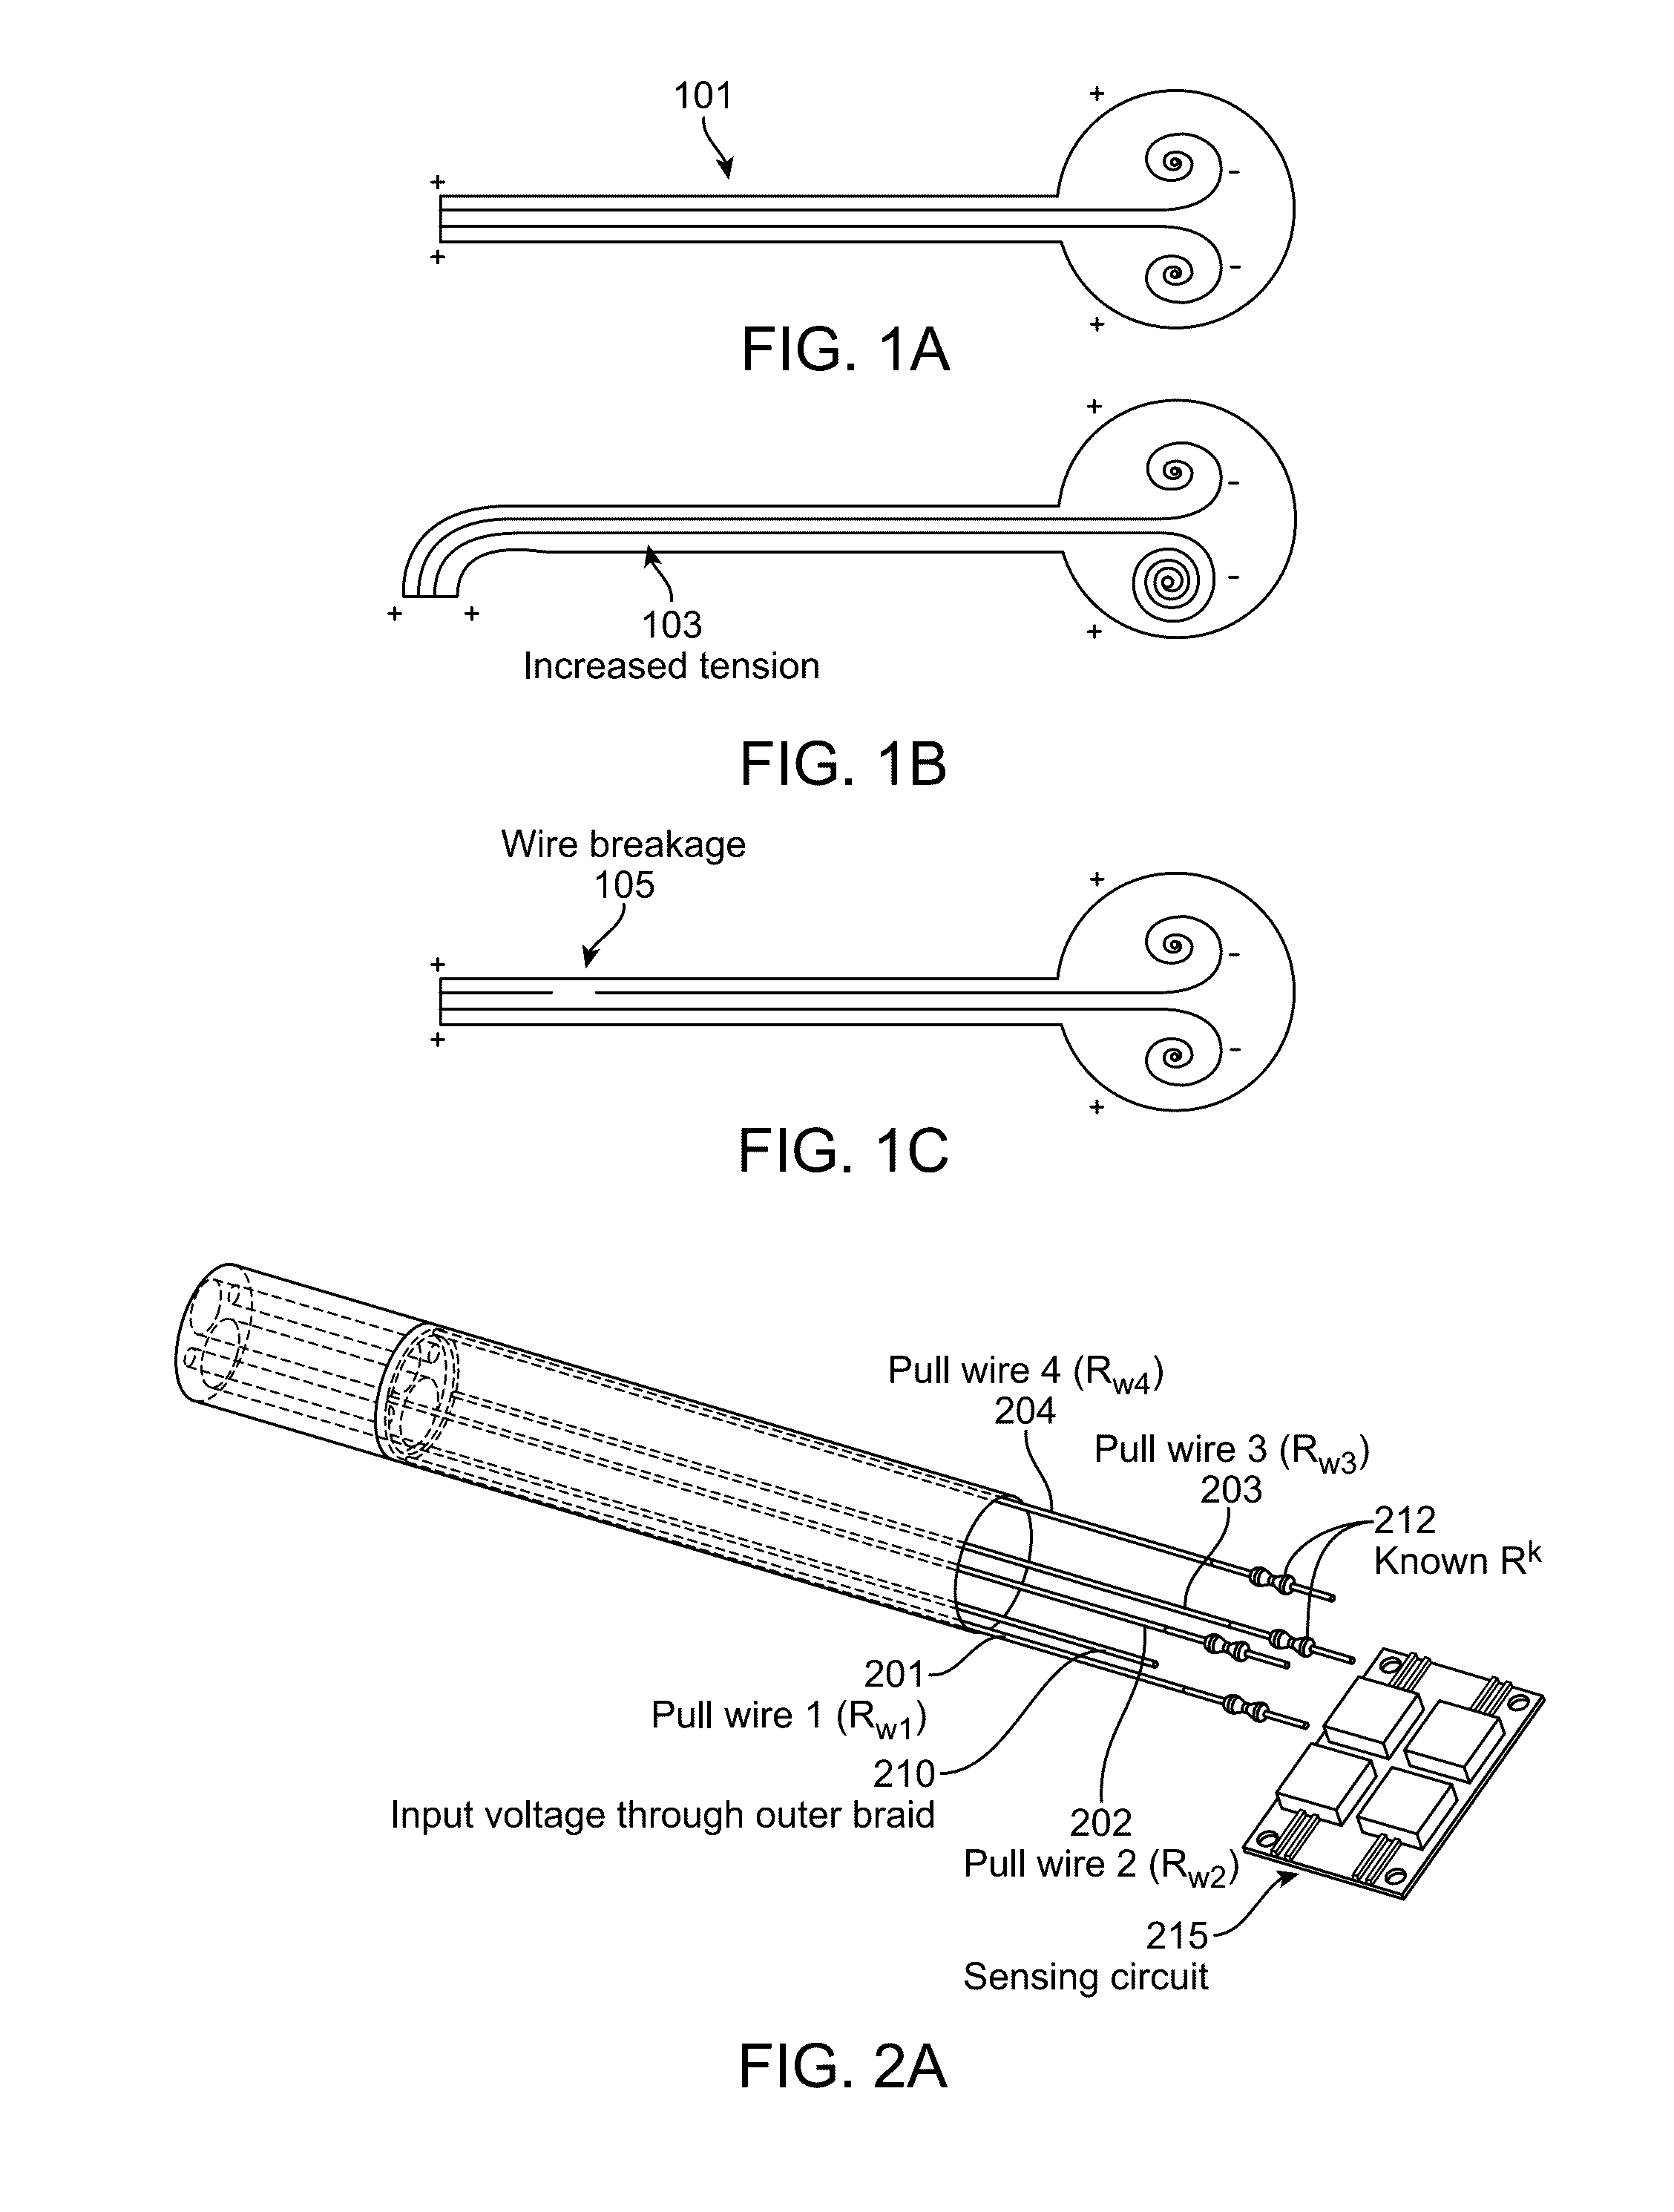 Apparatuses and methods for monitoring tendons of steerable catheters